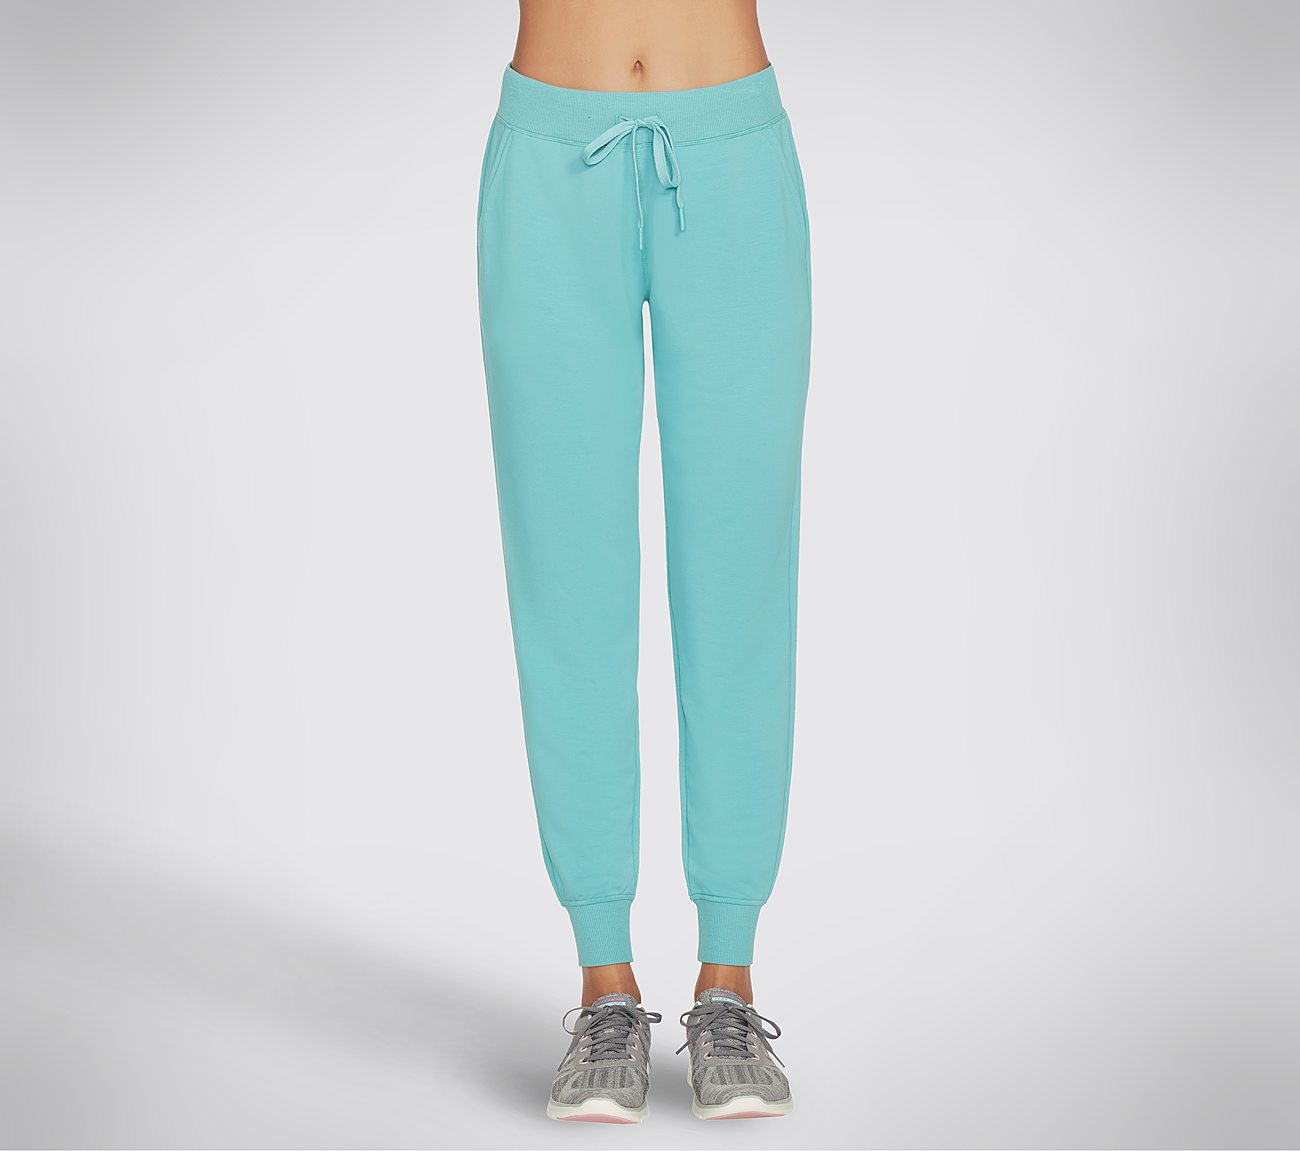 RESTFUL JOGGER, TURQUOISE Apparel Lateral View